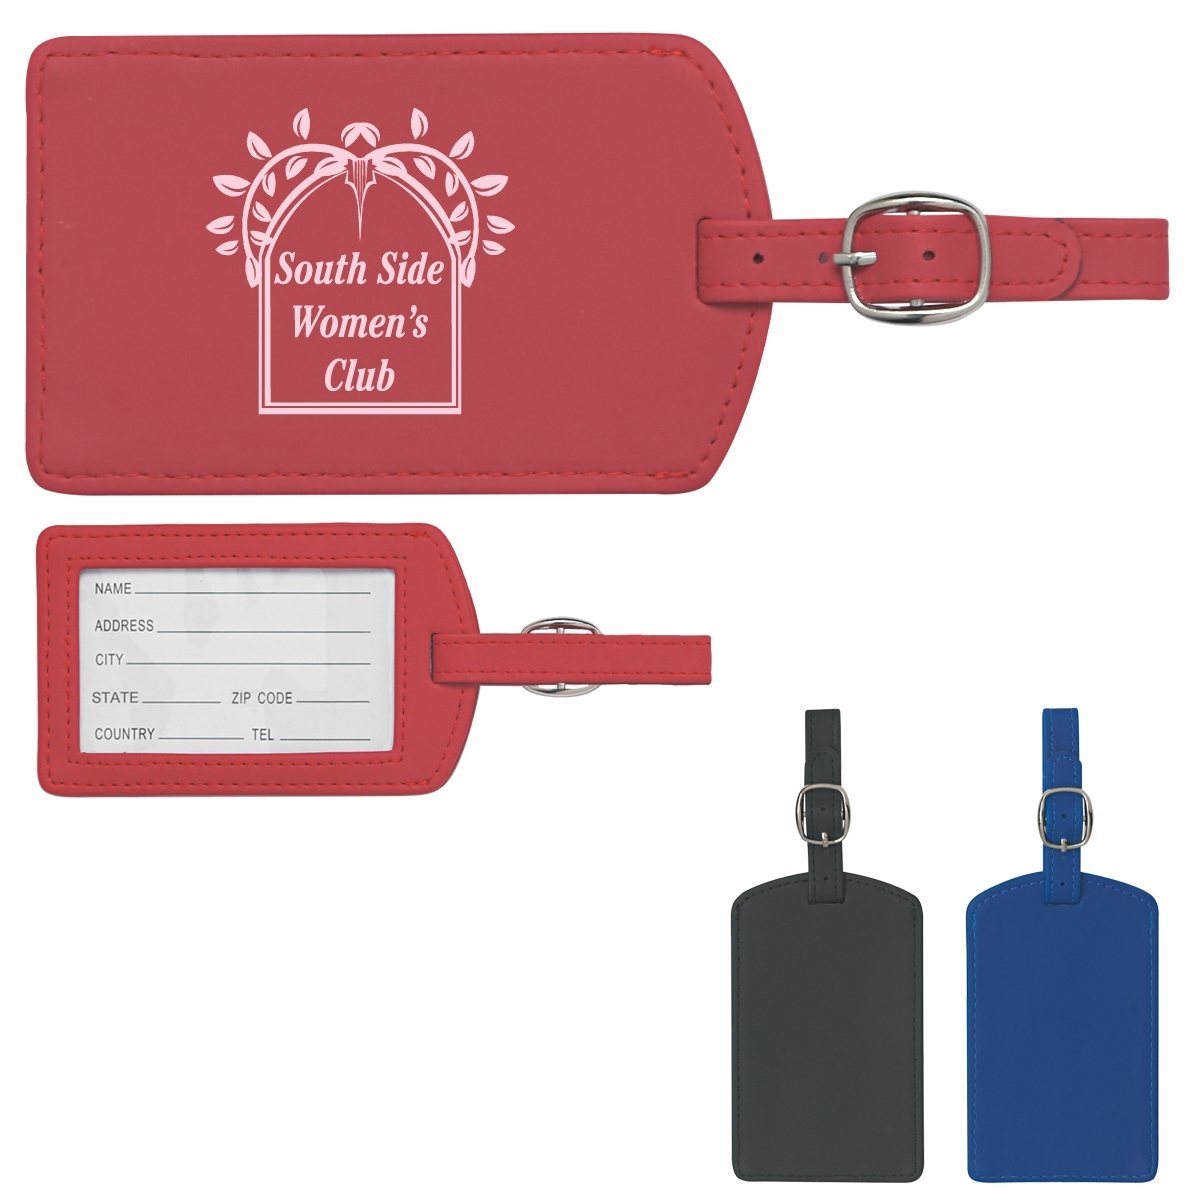 What Are the Different Types of Custom Luggage Tags?